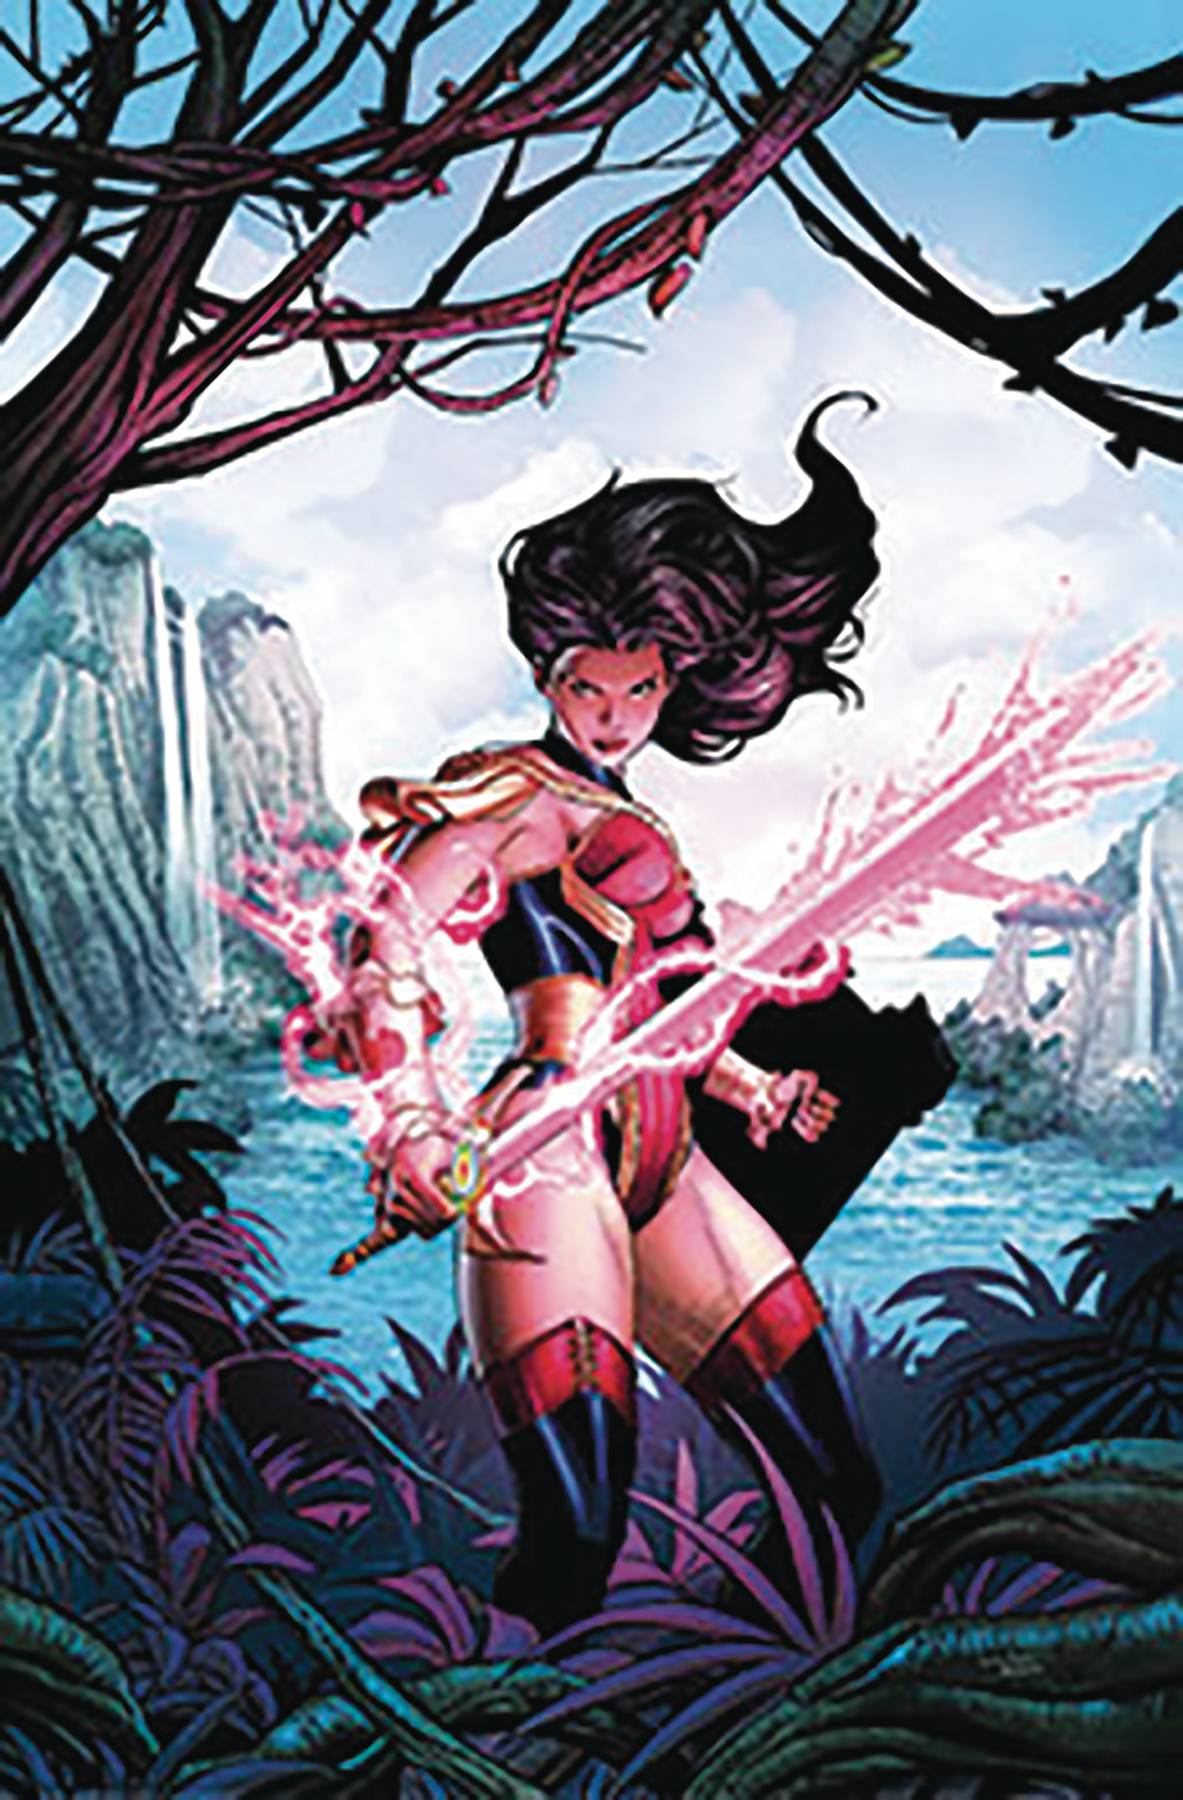 GRIMM FAIRY TALES #32 CVR A COCCOLO